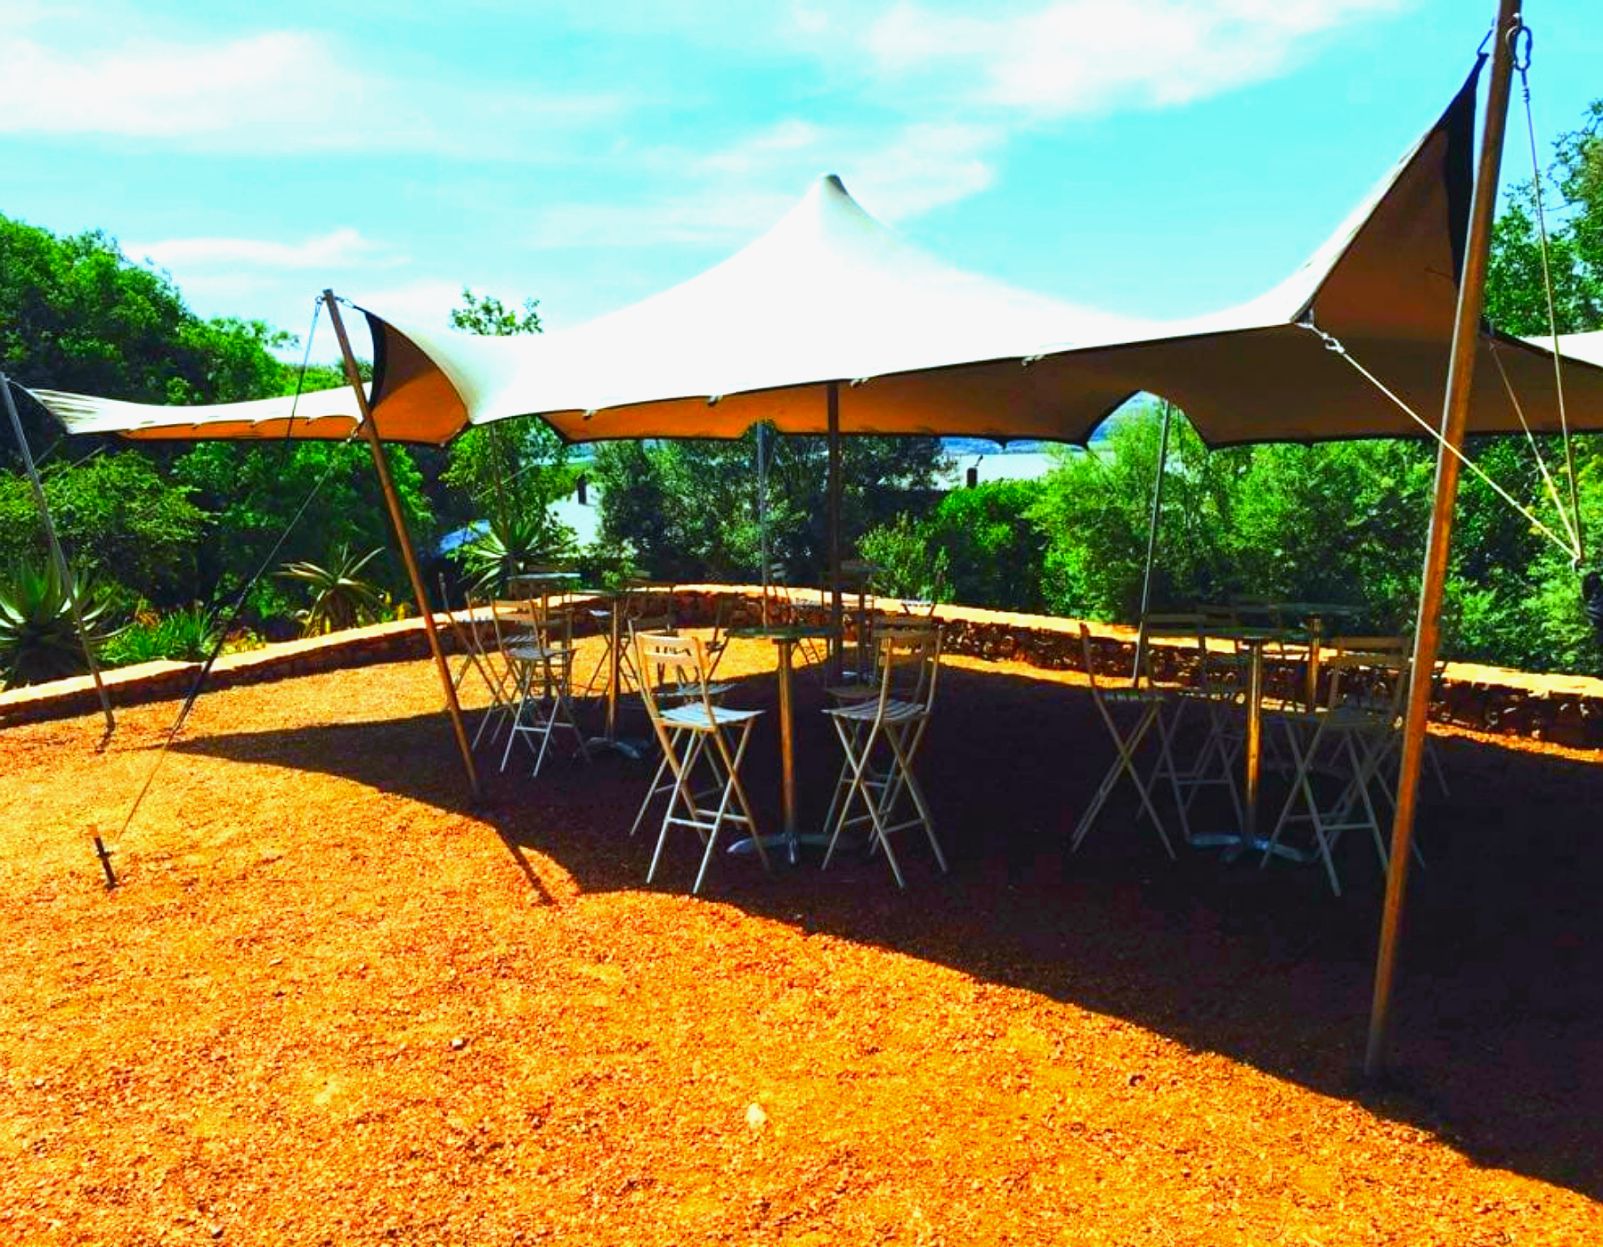 Stretch Tent With Bar Stools And Cocktail Tables on Sand.